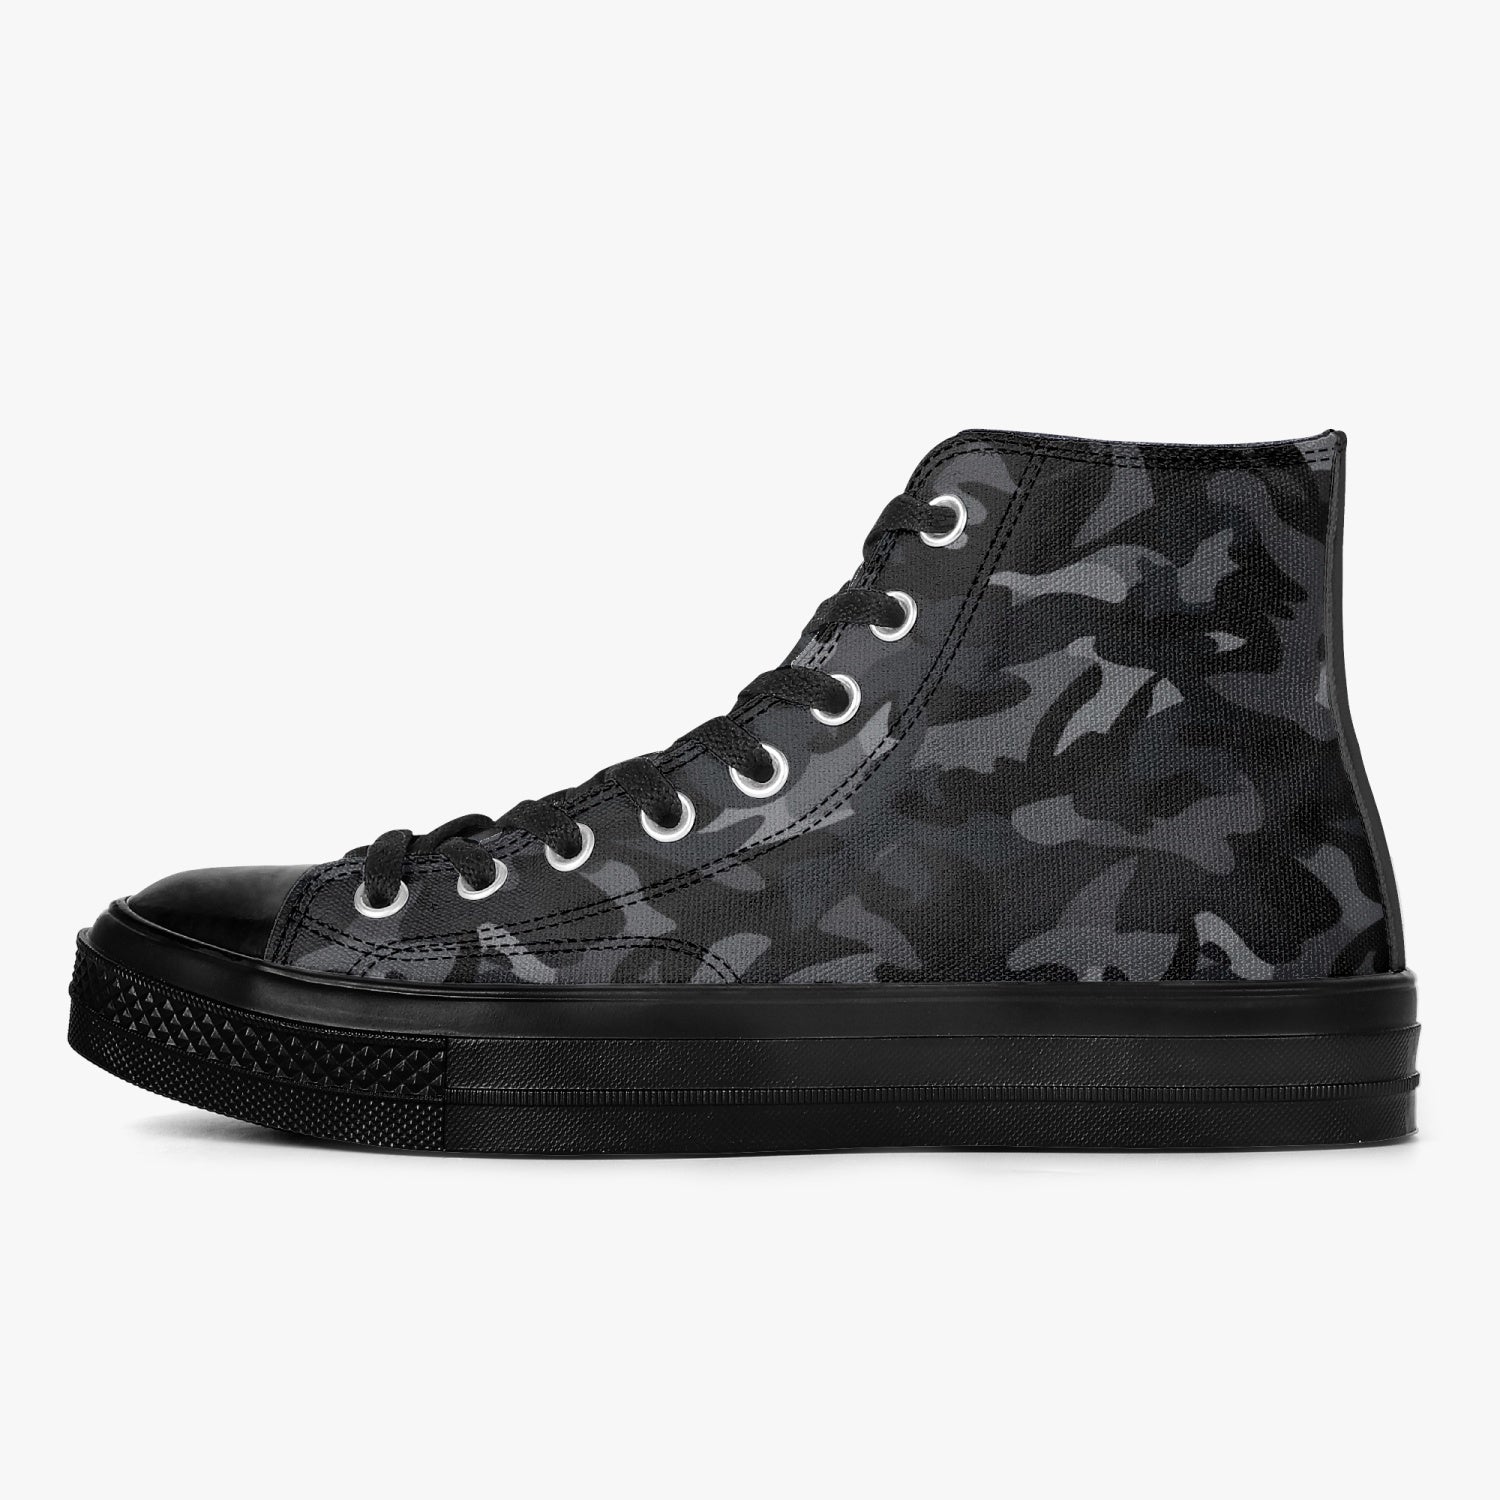 Black Camo High Top Shoes, Camouflage Grey Lace Up Sneakers Footwear Rave Canvas Streetwear Designer Men Women Starcove Fashion